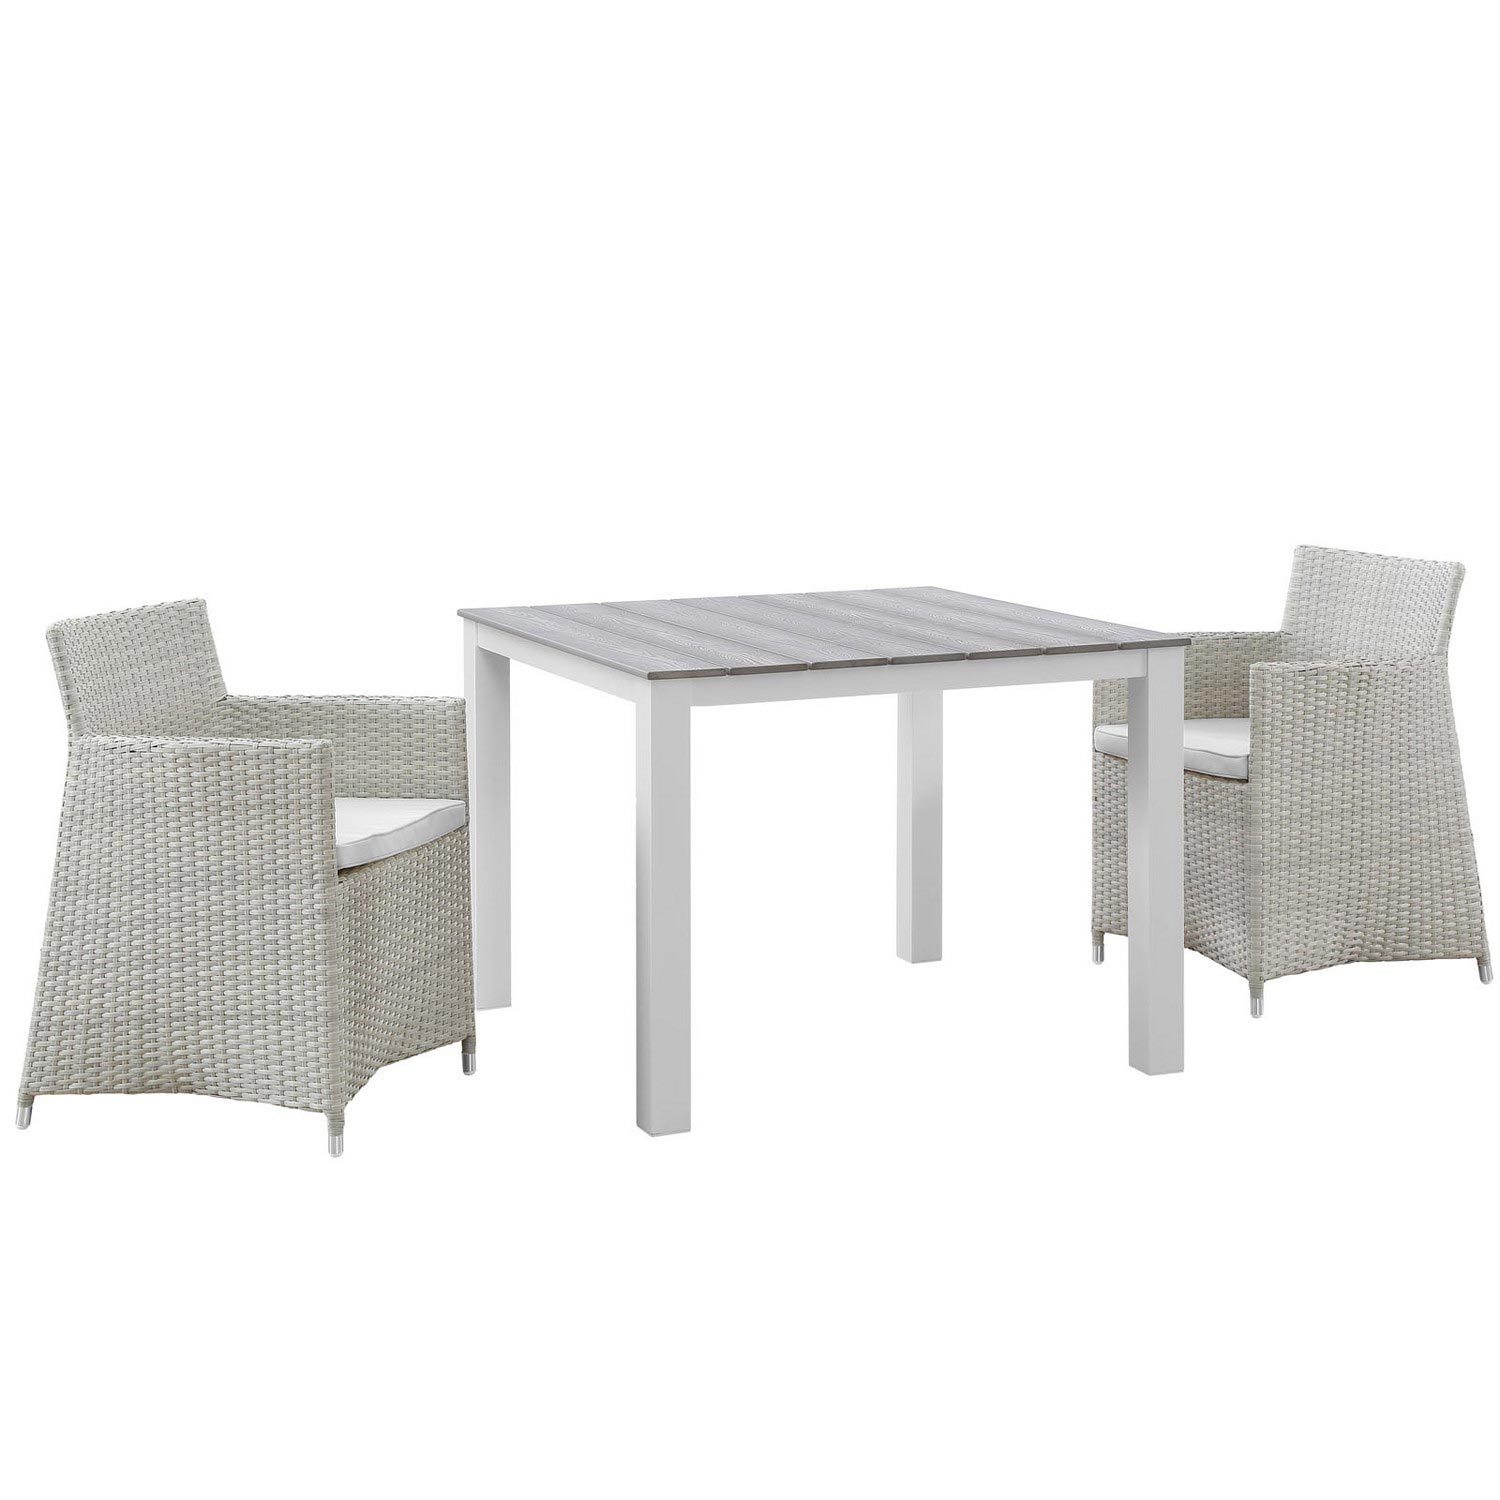 Modway Junction 3 Piece Outdoor Patio Wicker Dining Set - Gray/White